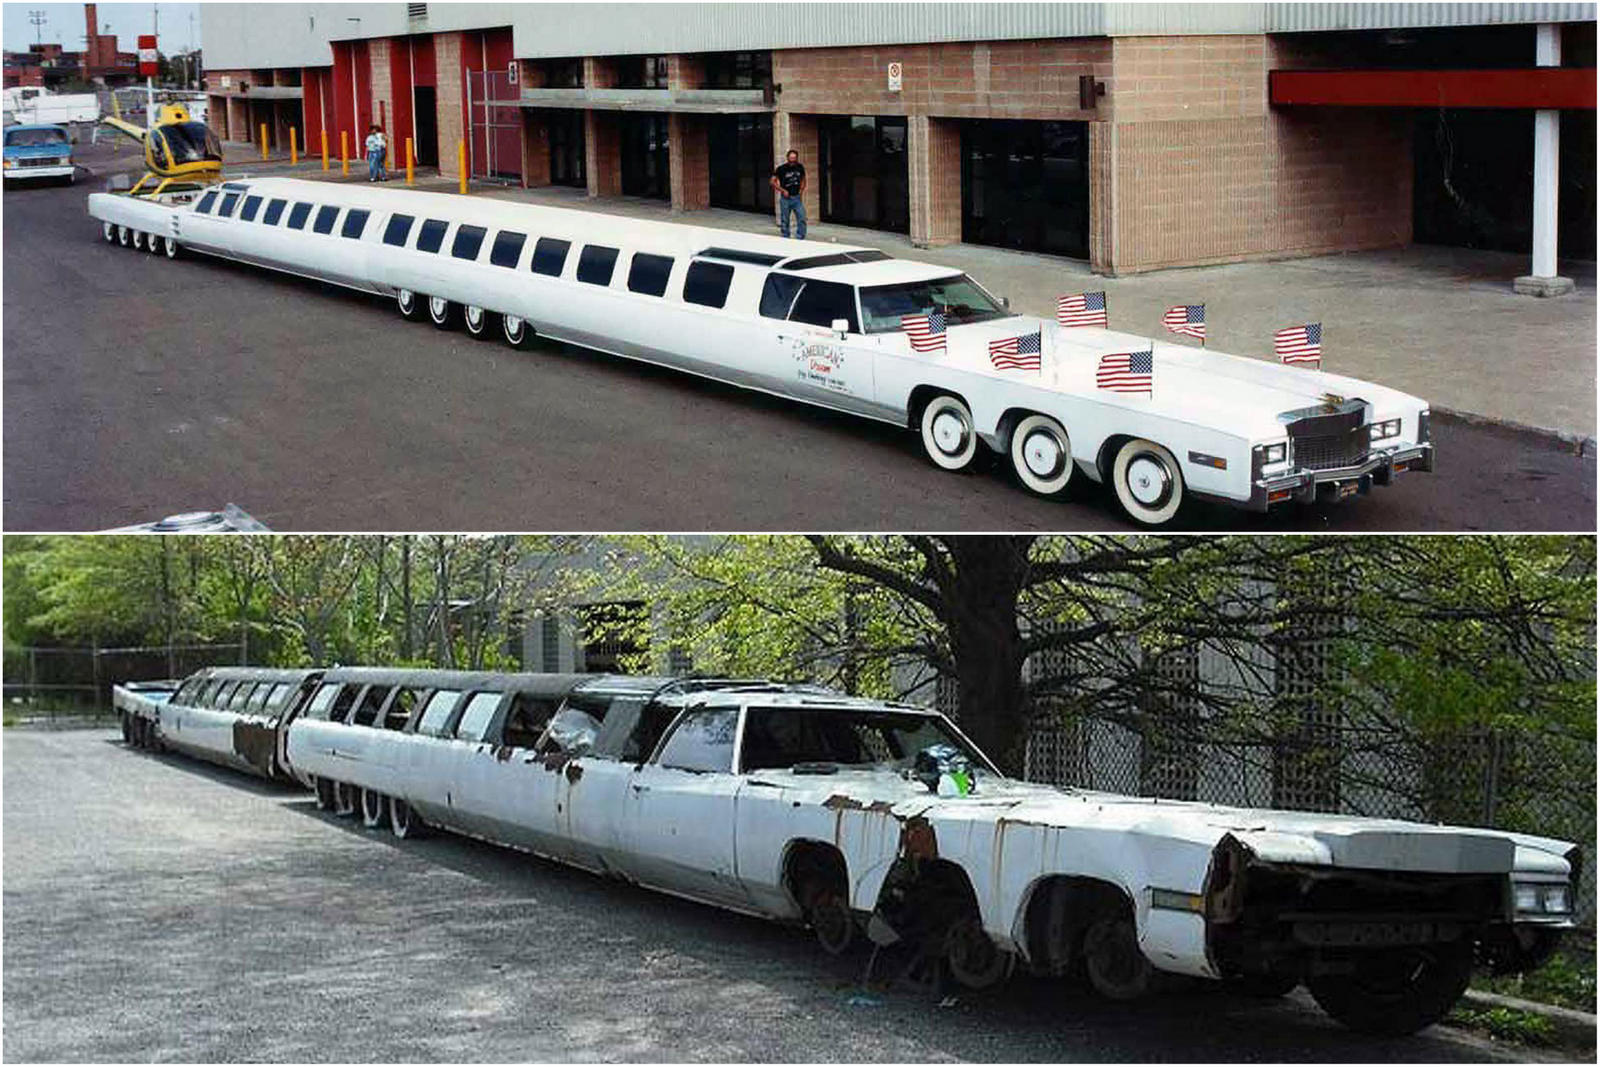 The Longest Car In The World